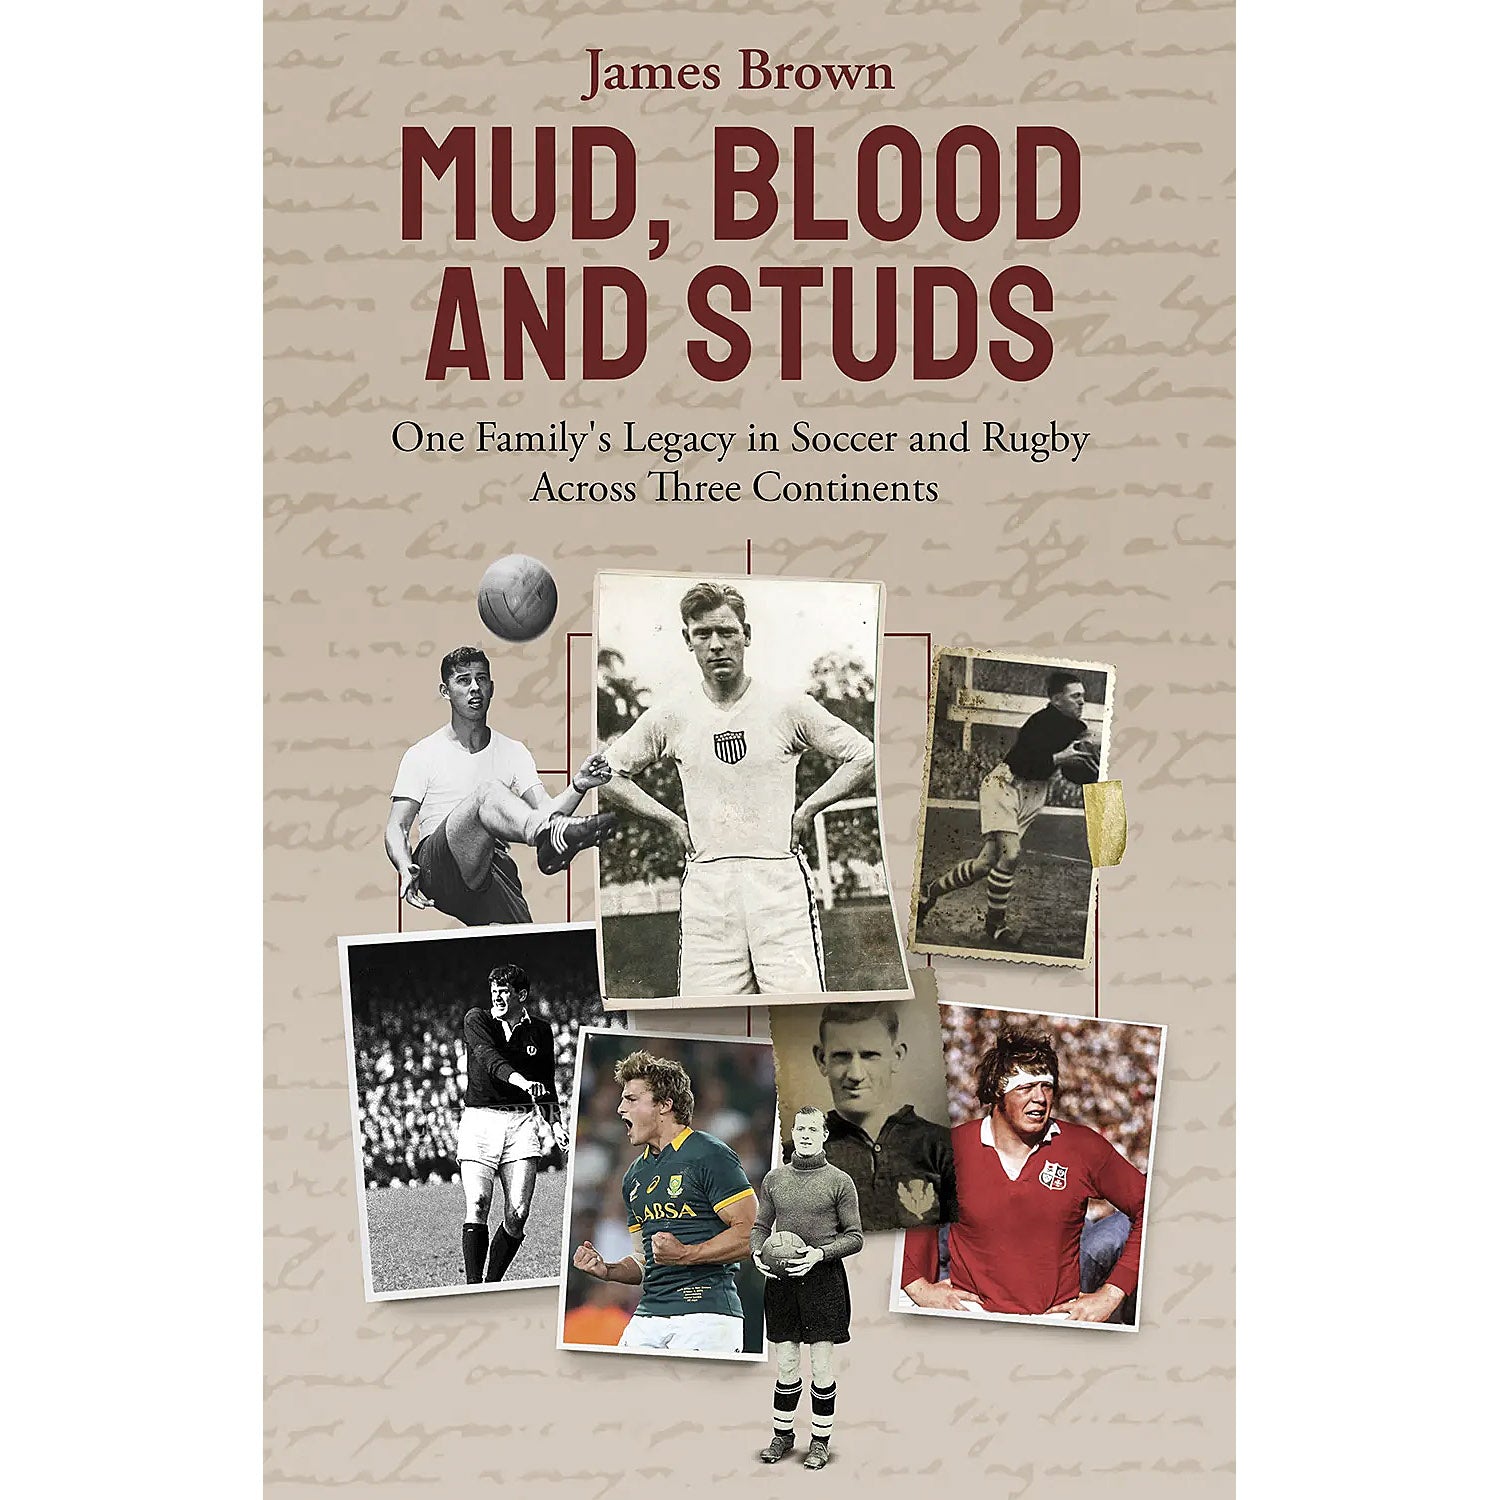 Mud, Blood and Studs – One Family's Legacy in Soccer and Rugby Across Three Continents